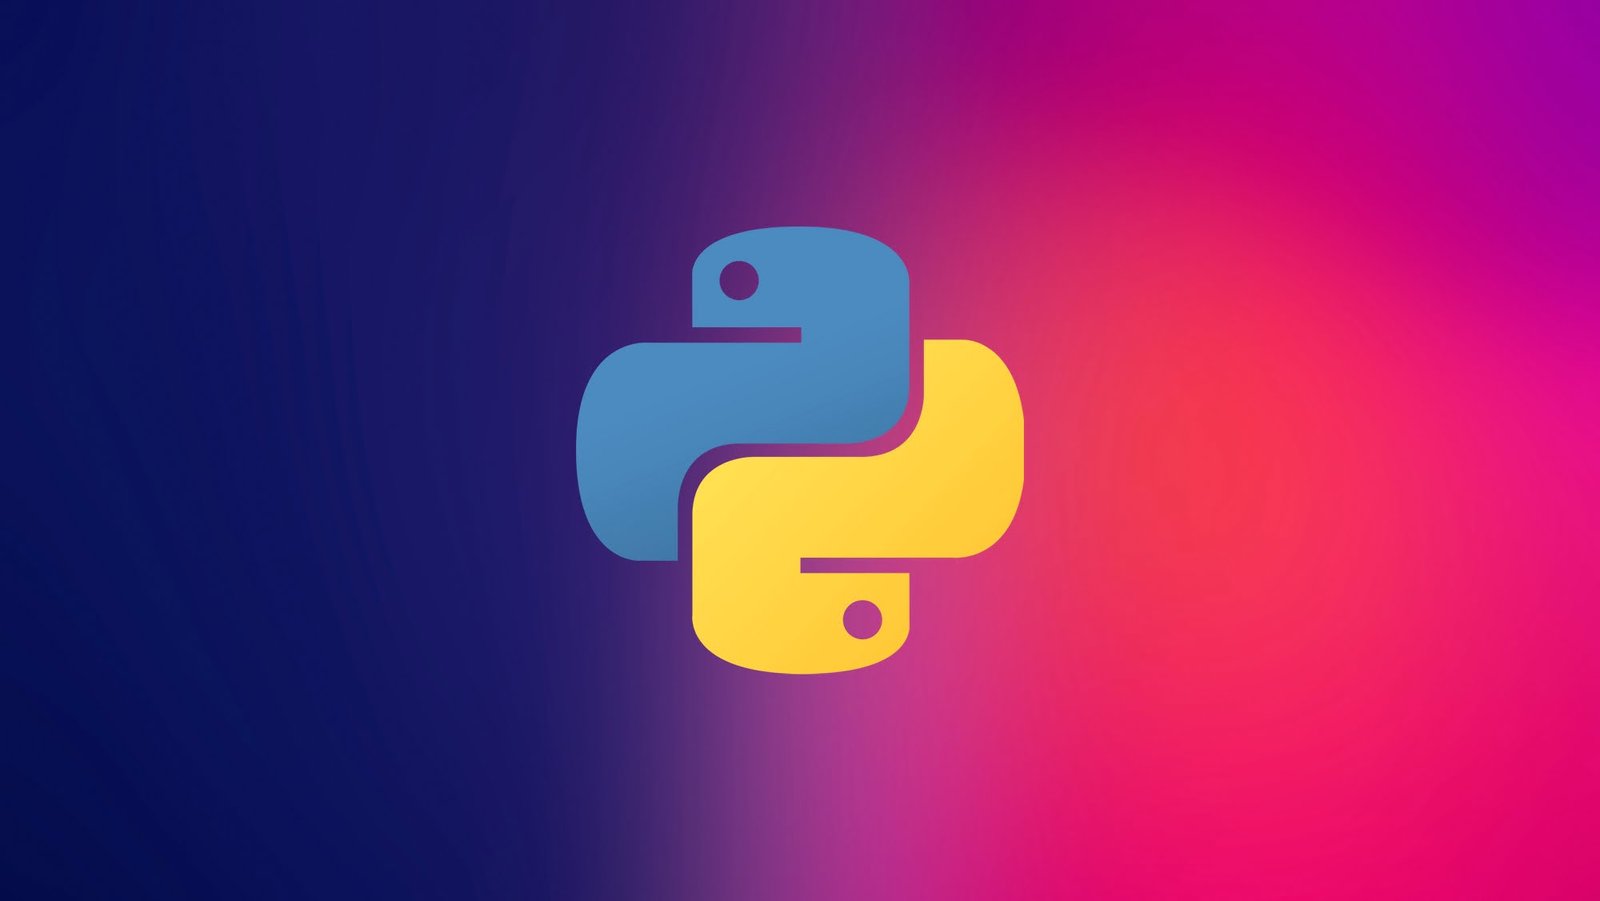 Why is python essential for data analysis and data science?